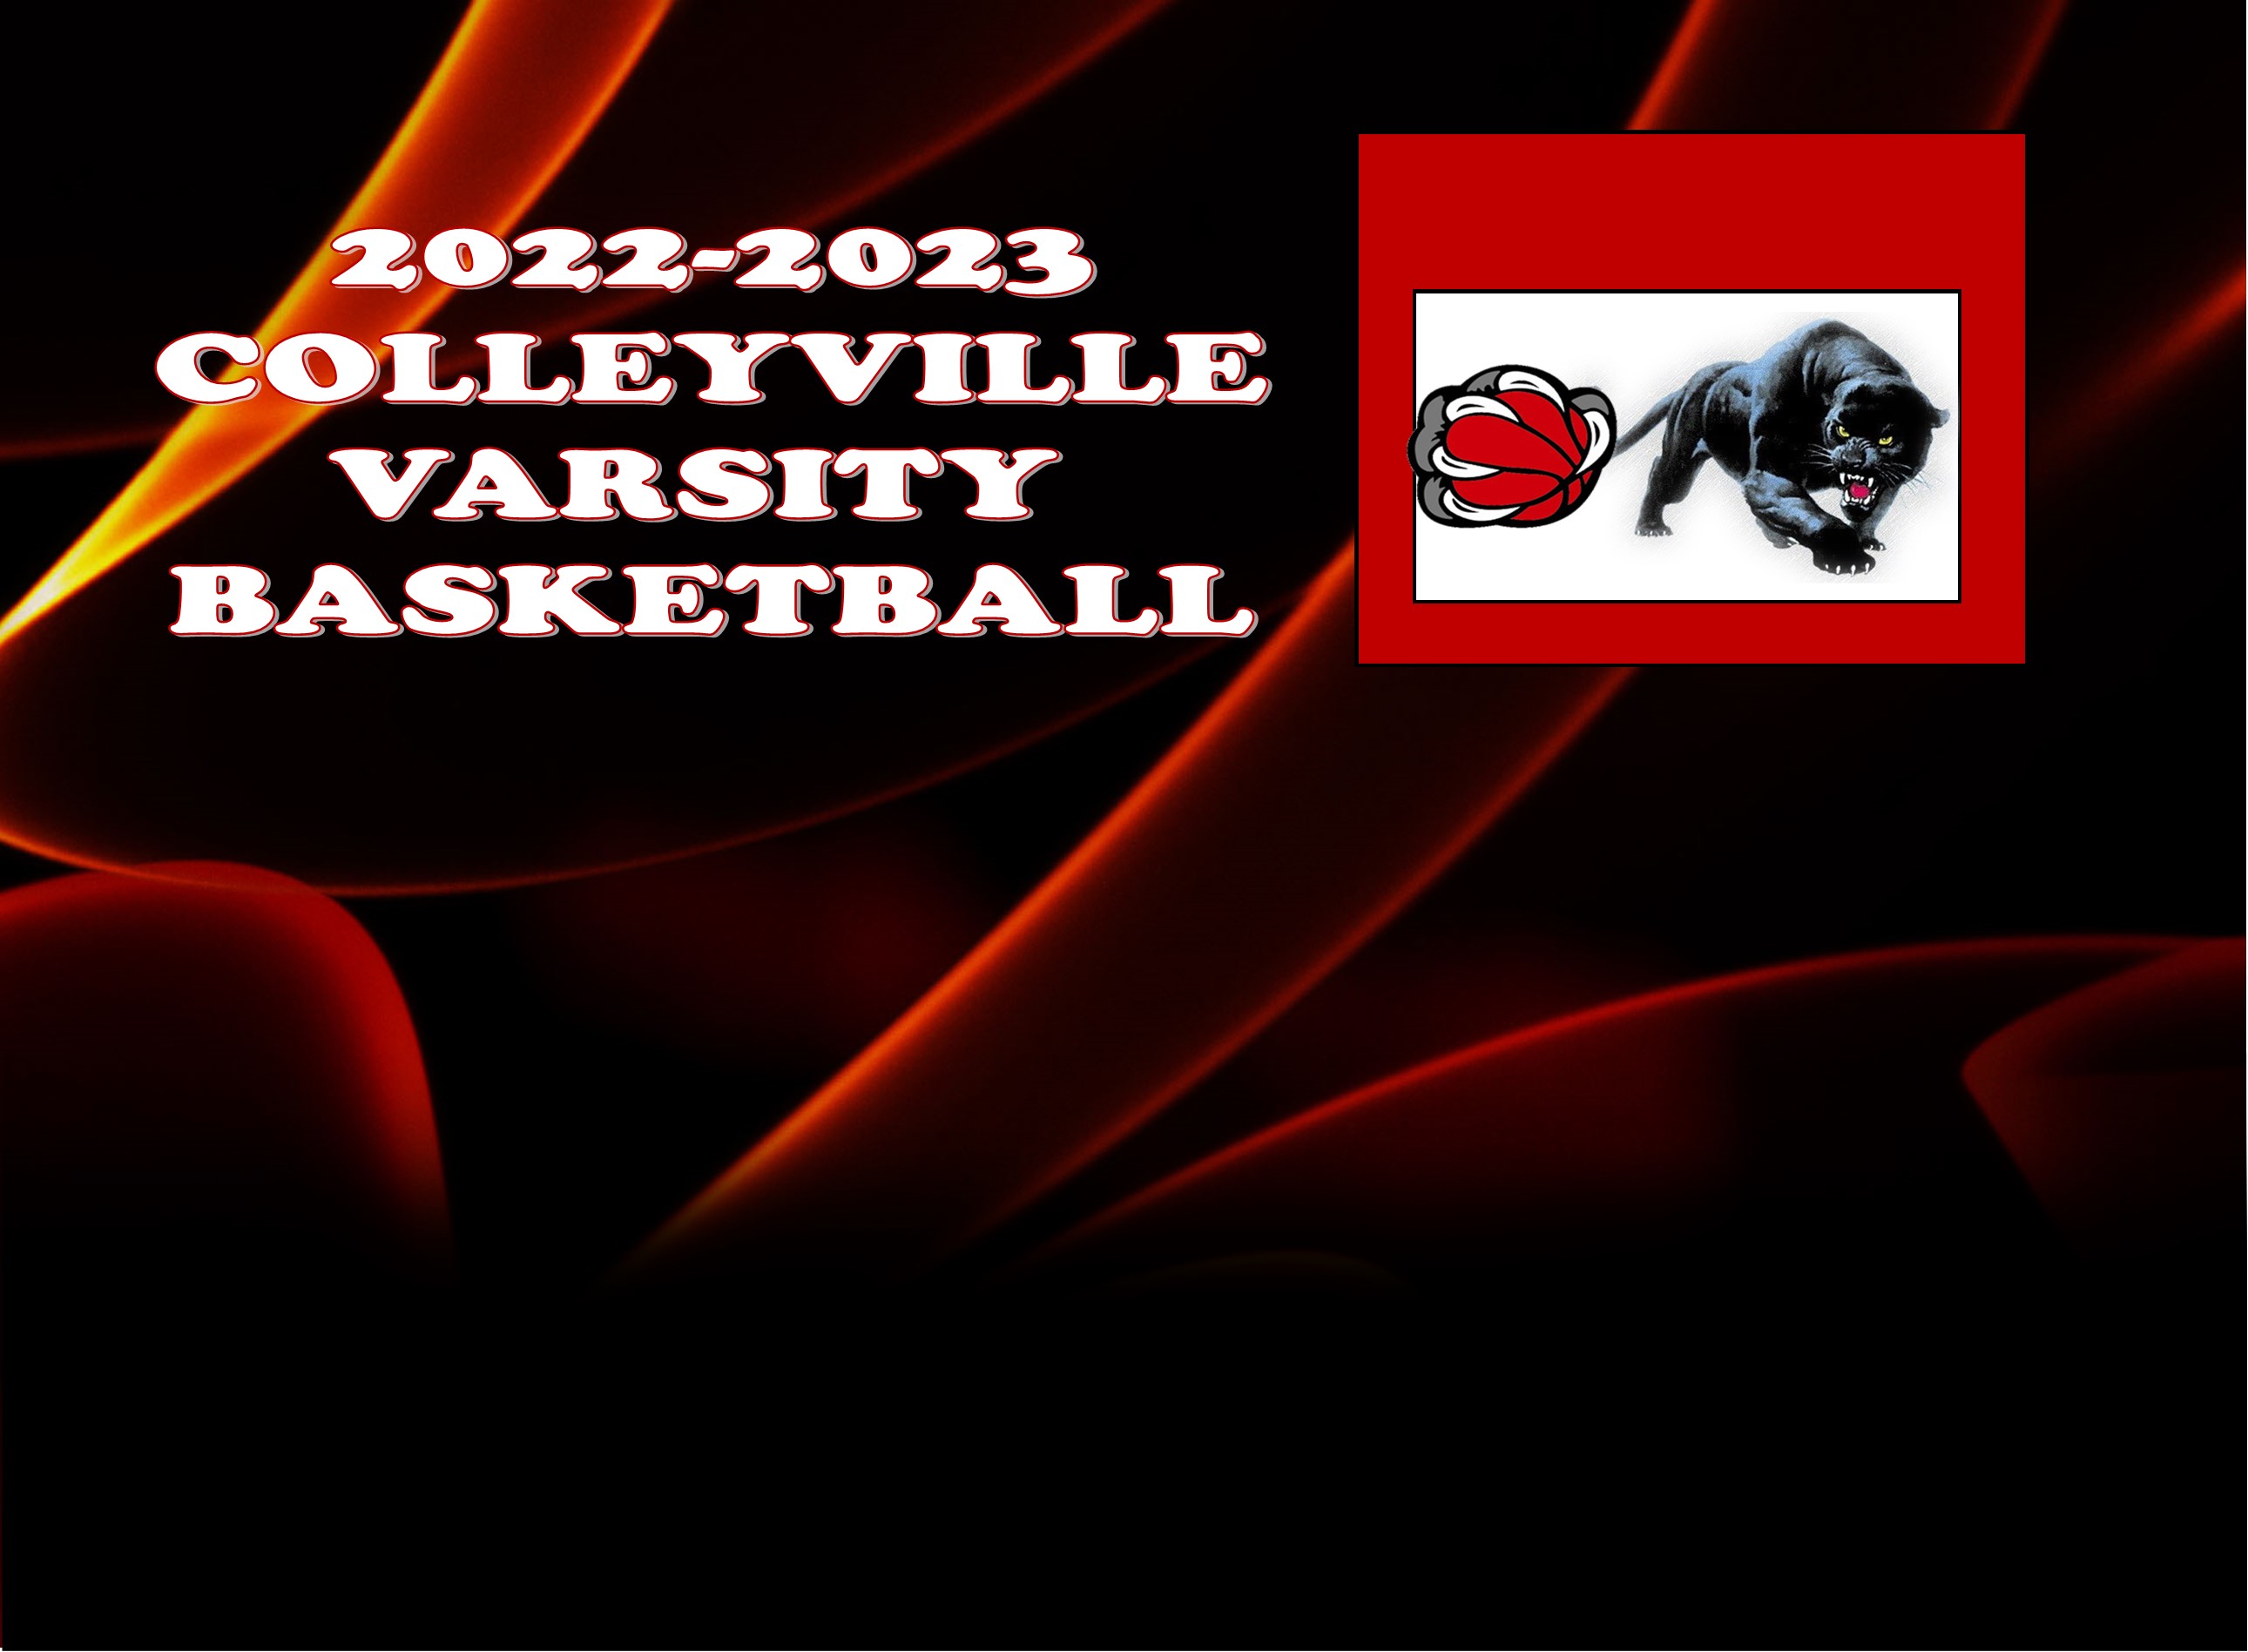 CHHS Varsity Basketball: Colleyville Panthers Upended by Birdville Hawks in District Game 71-67